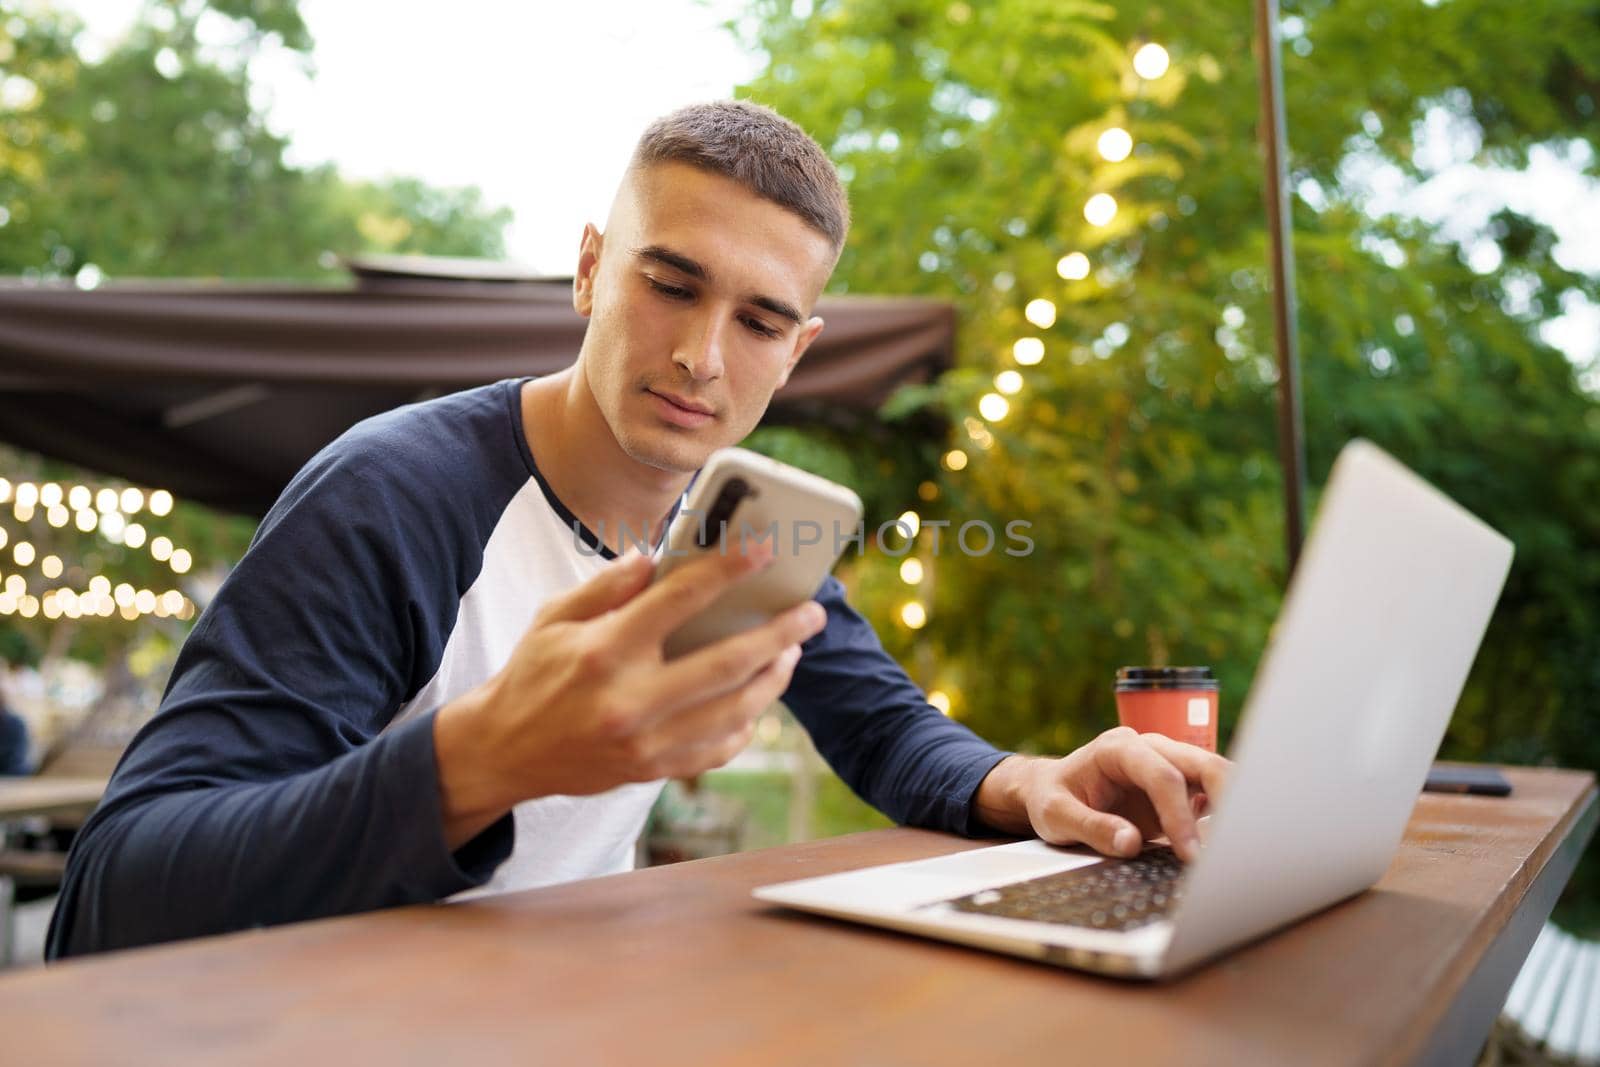 Young man using smartphone while sitting at outdoor cafe, close up